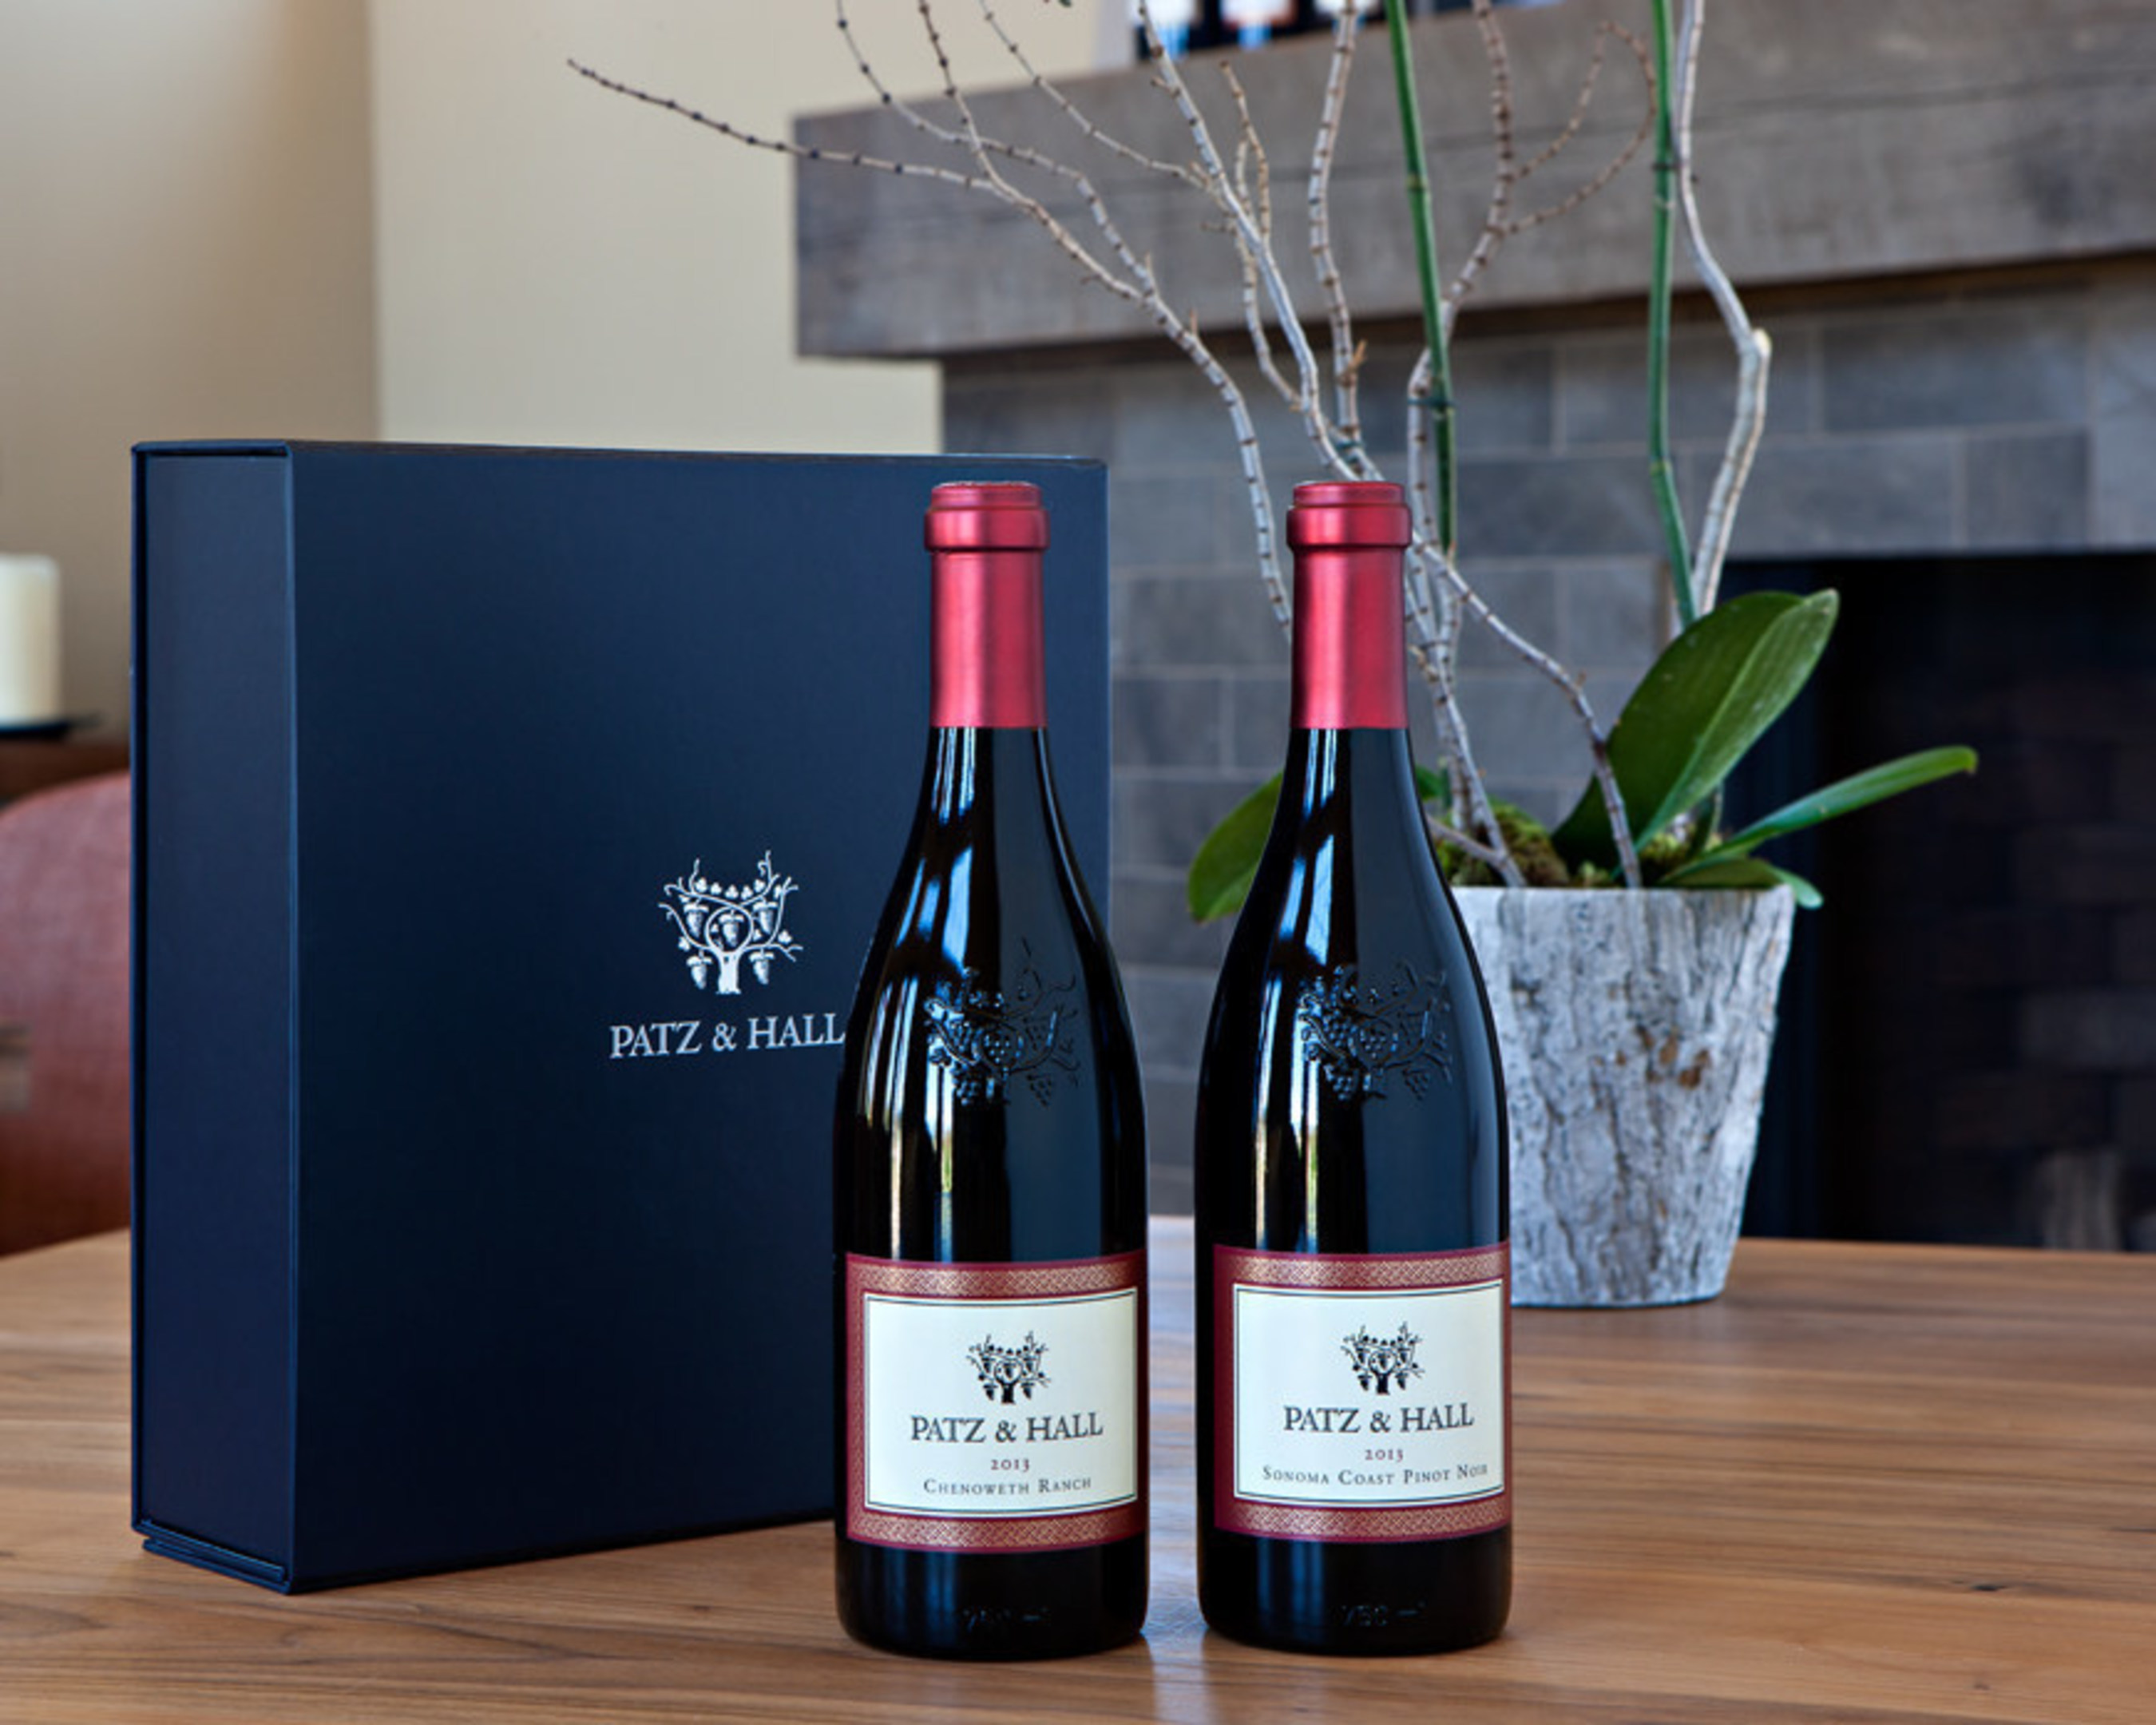 Patz & Hall produces a collection of appellation and single-vineyard designated wines each vintage, including several vineyard-designate wines that are released exclusively to members of its Salon Society wine club.